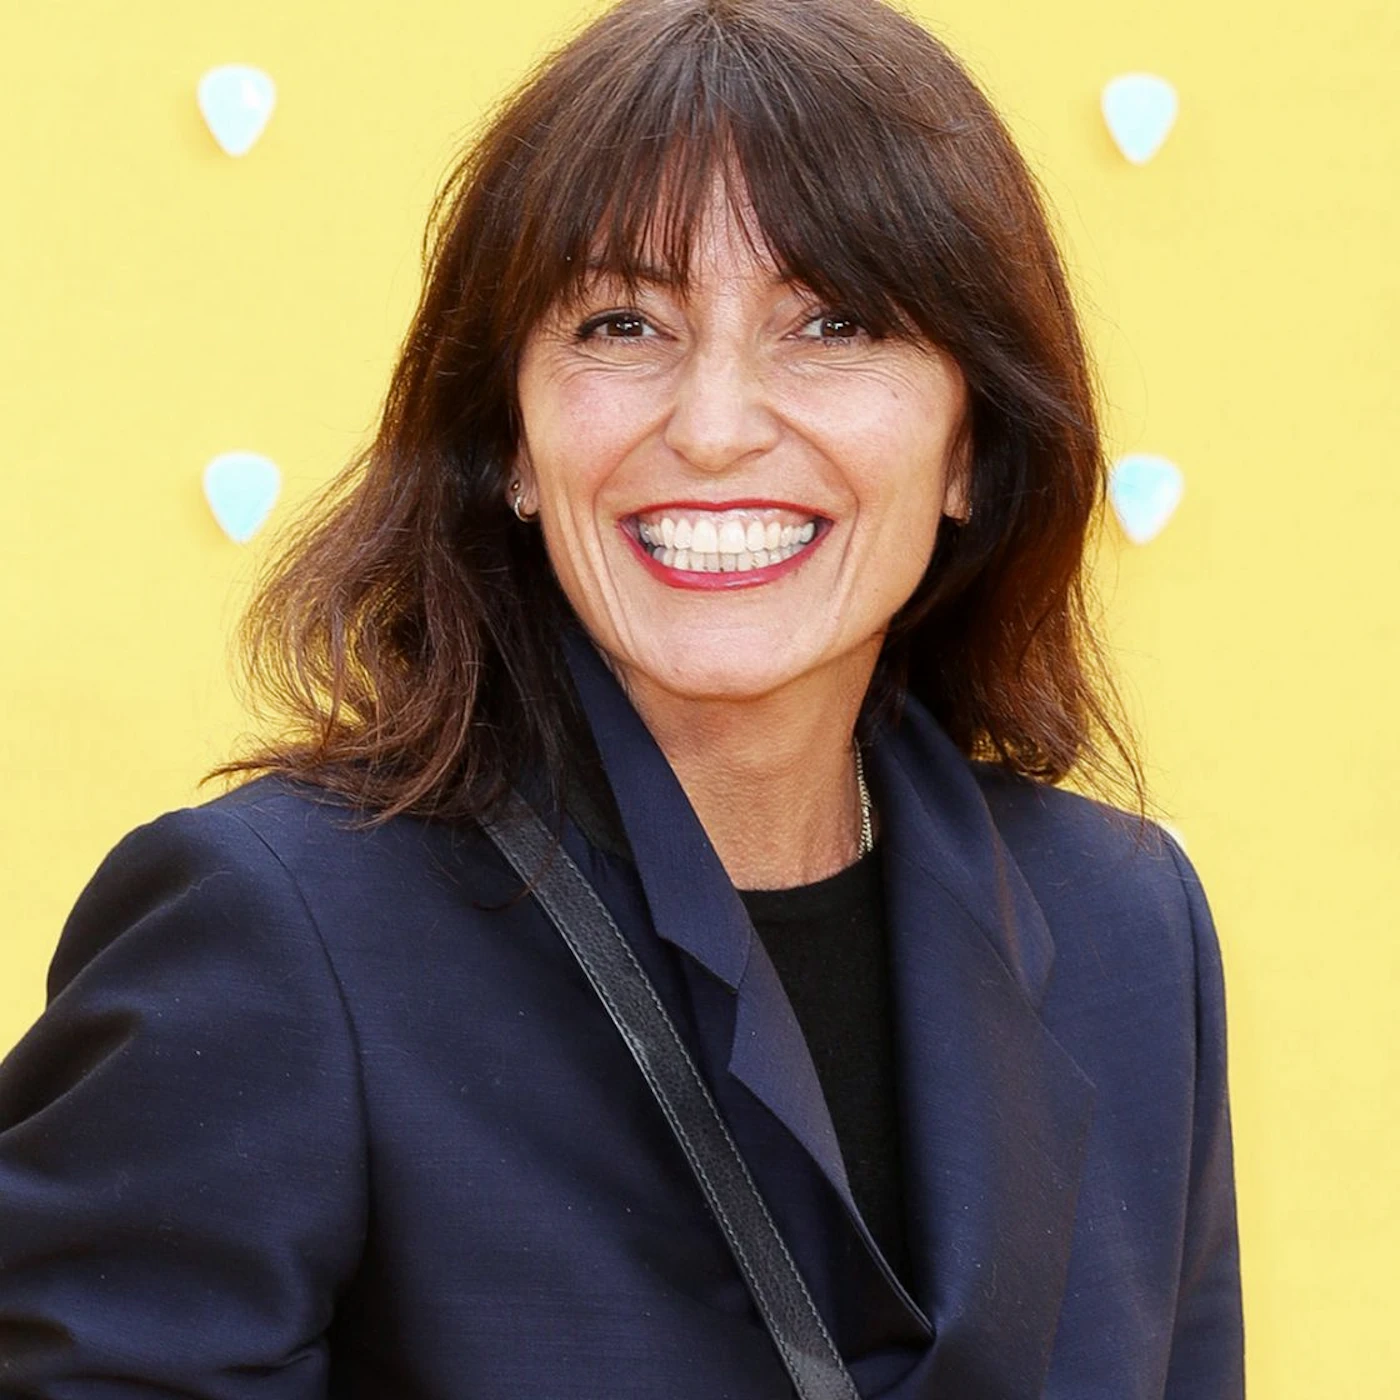 Davina McCall has unveiled her tried-and-tested burnout cure